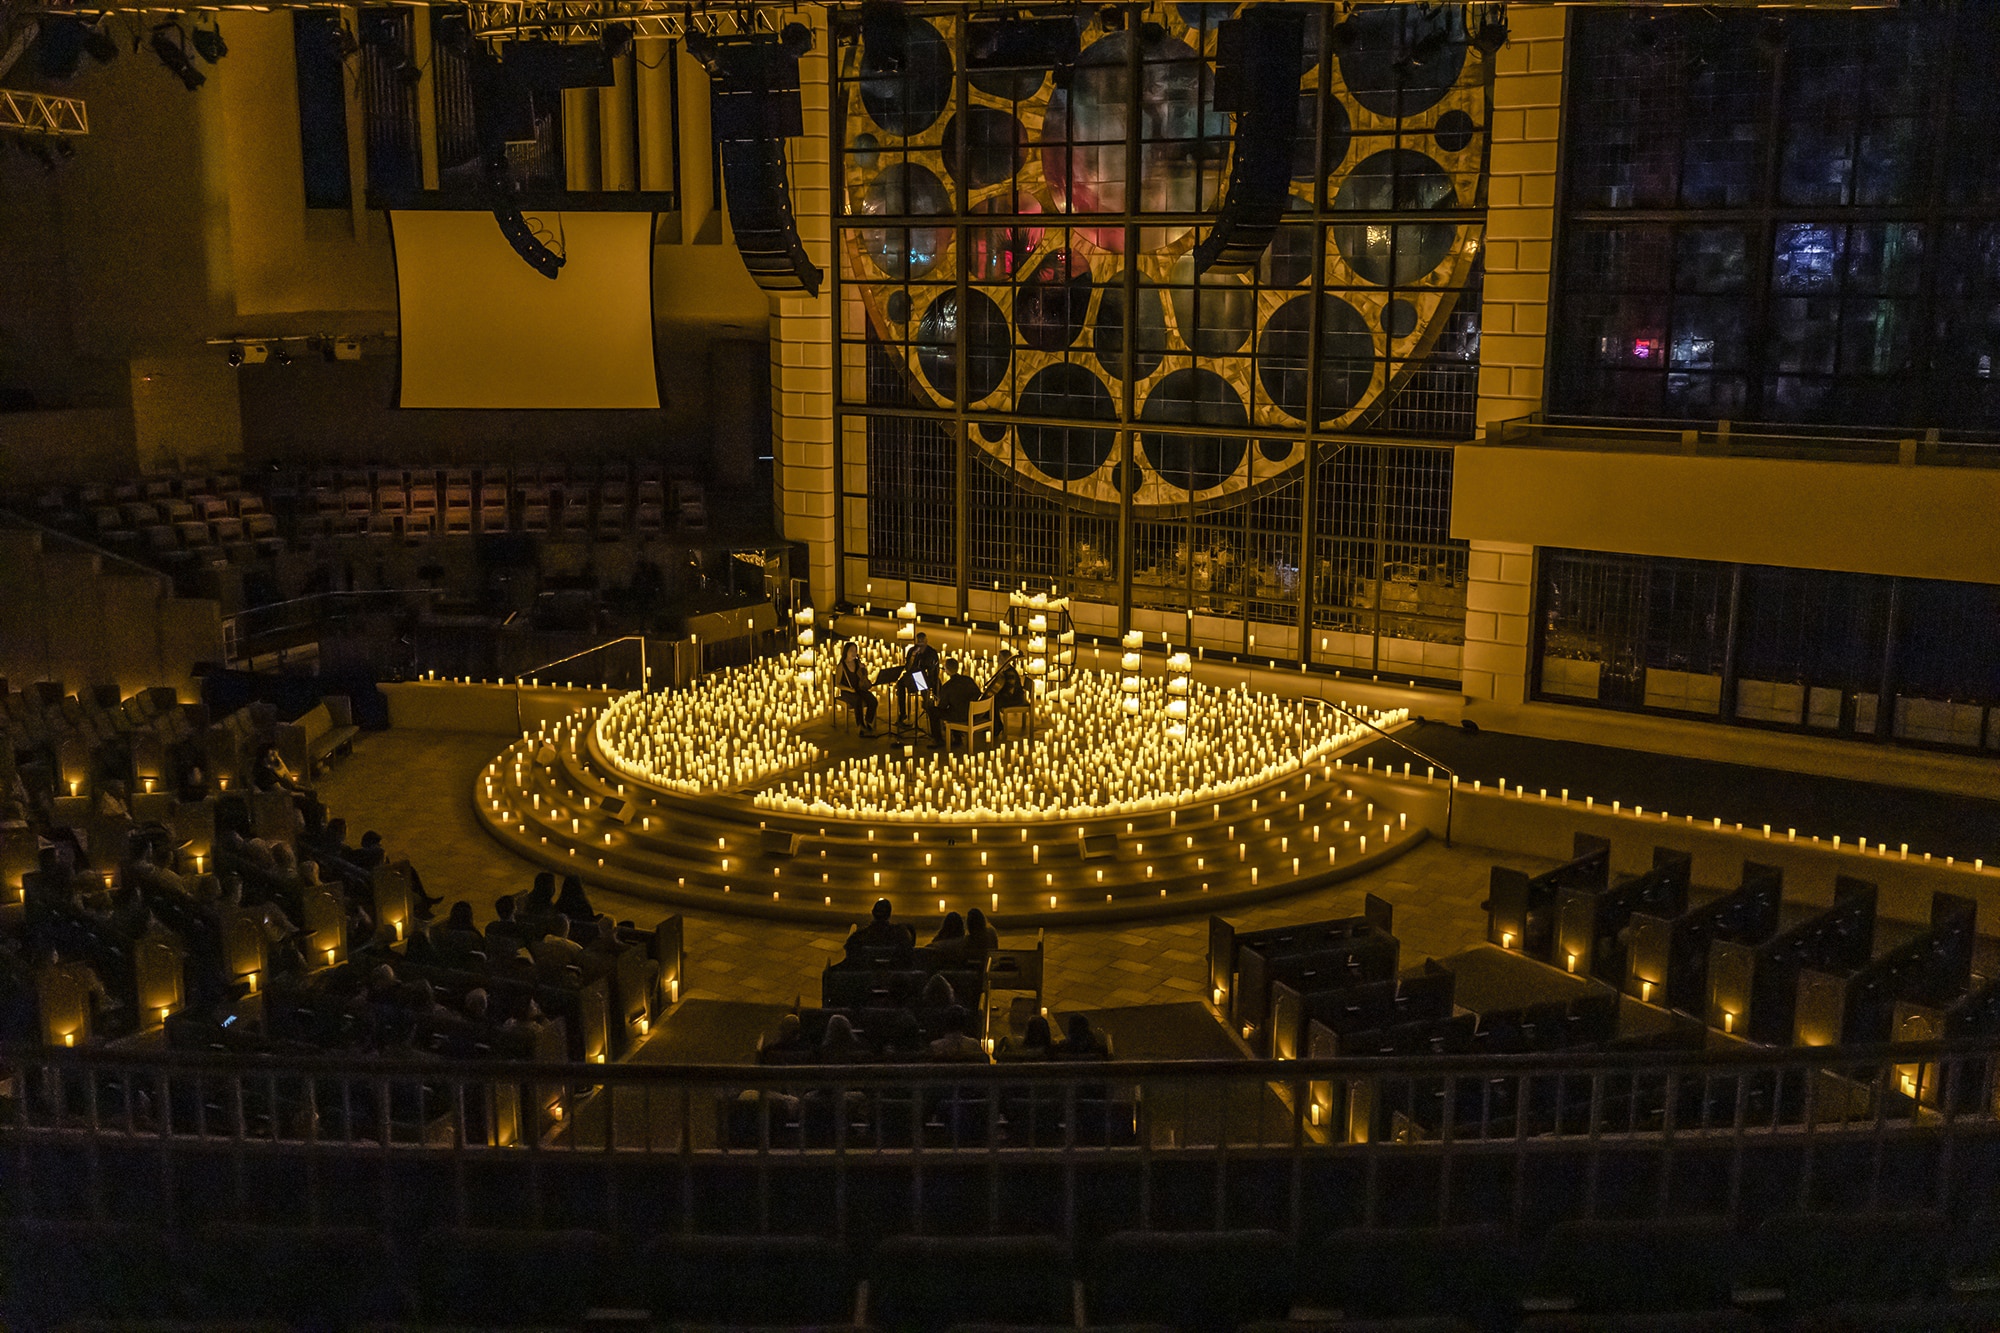 A wide shot of the interior of the First Baptist Church in St. Petersburg revealing a string quartet performing on stage surrounded by candles.